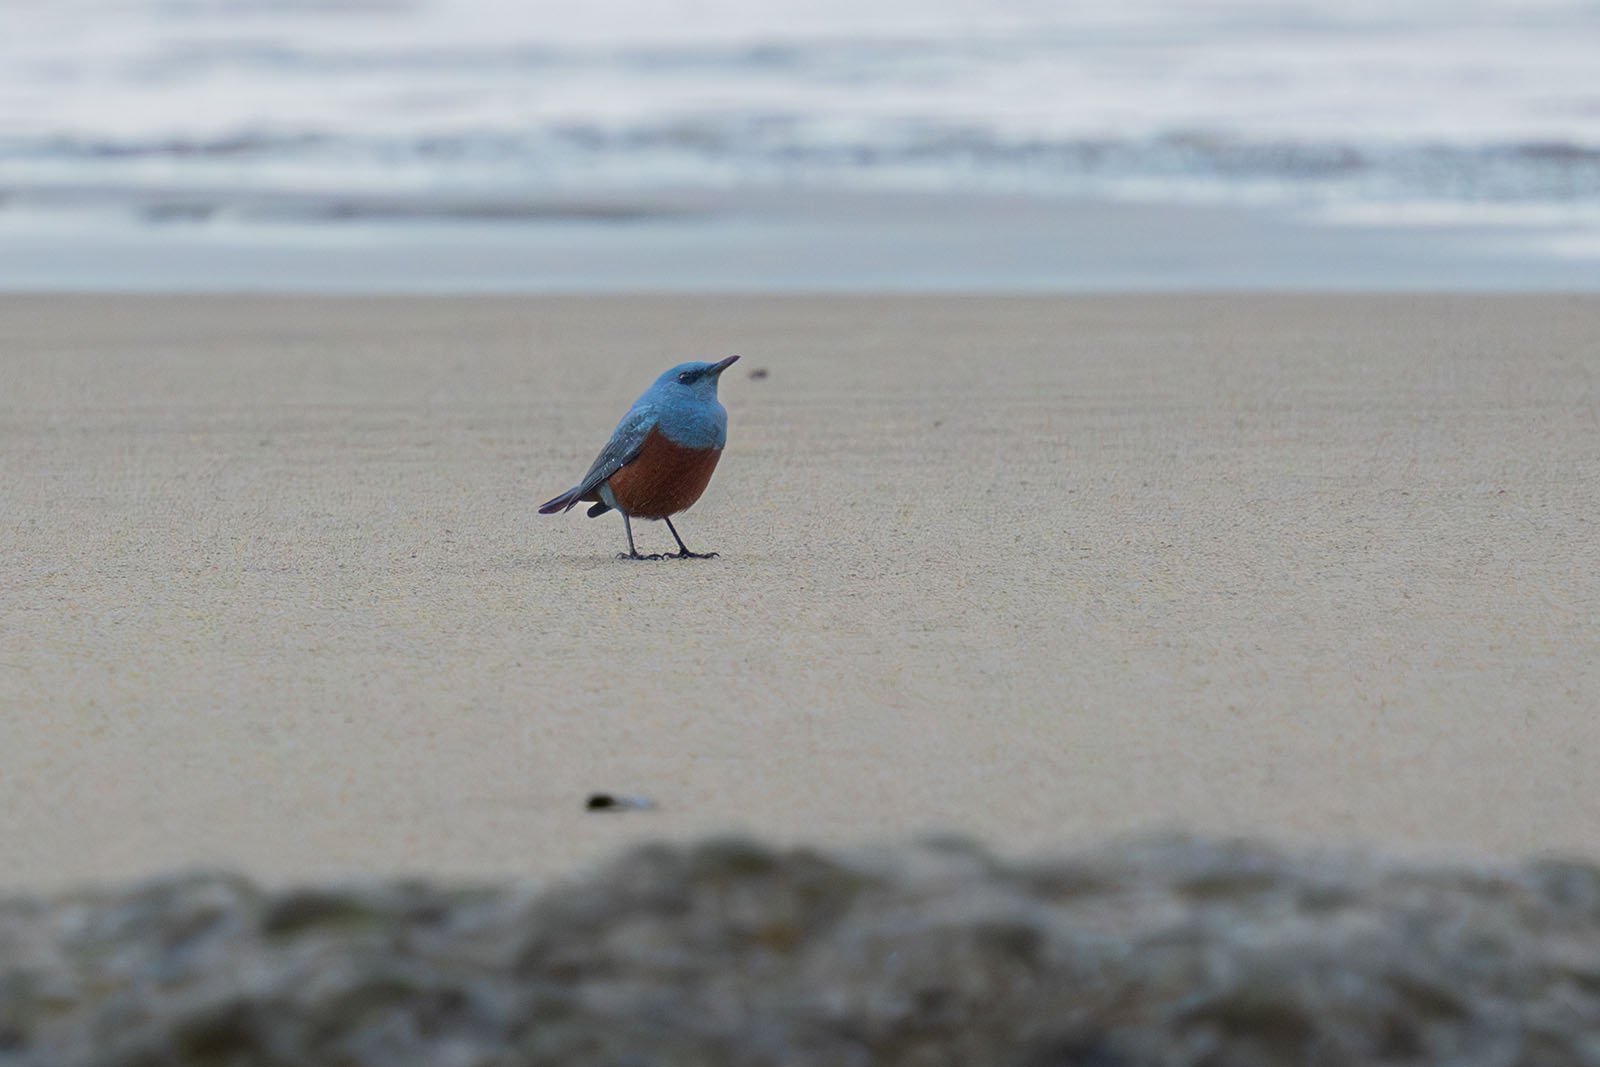 A vibrant blue bird stands on a sandy beach, with gentle ocean waves in the background and a blurred rocky foreground.